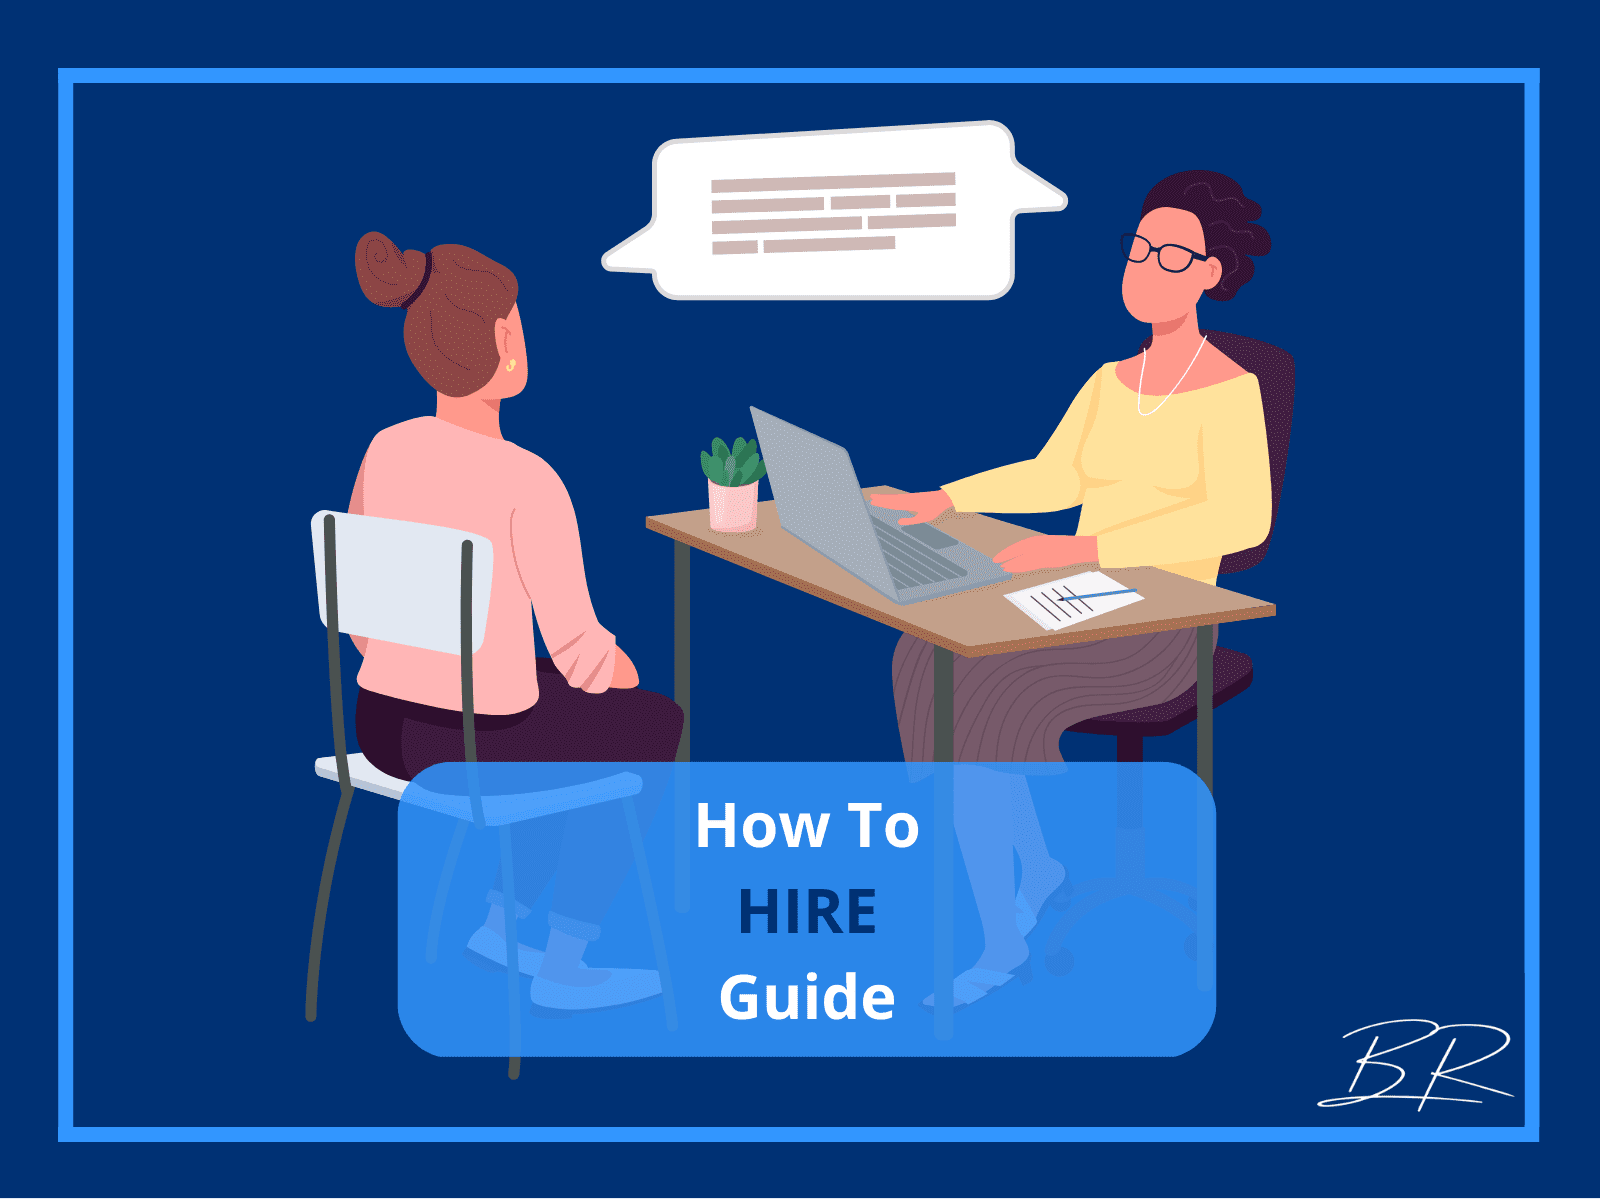 How To Hire Guide